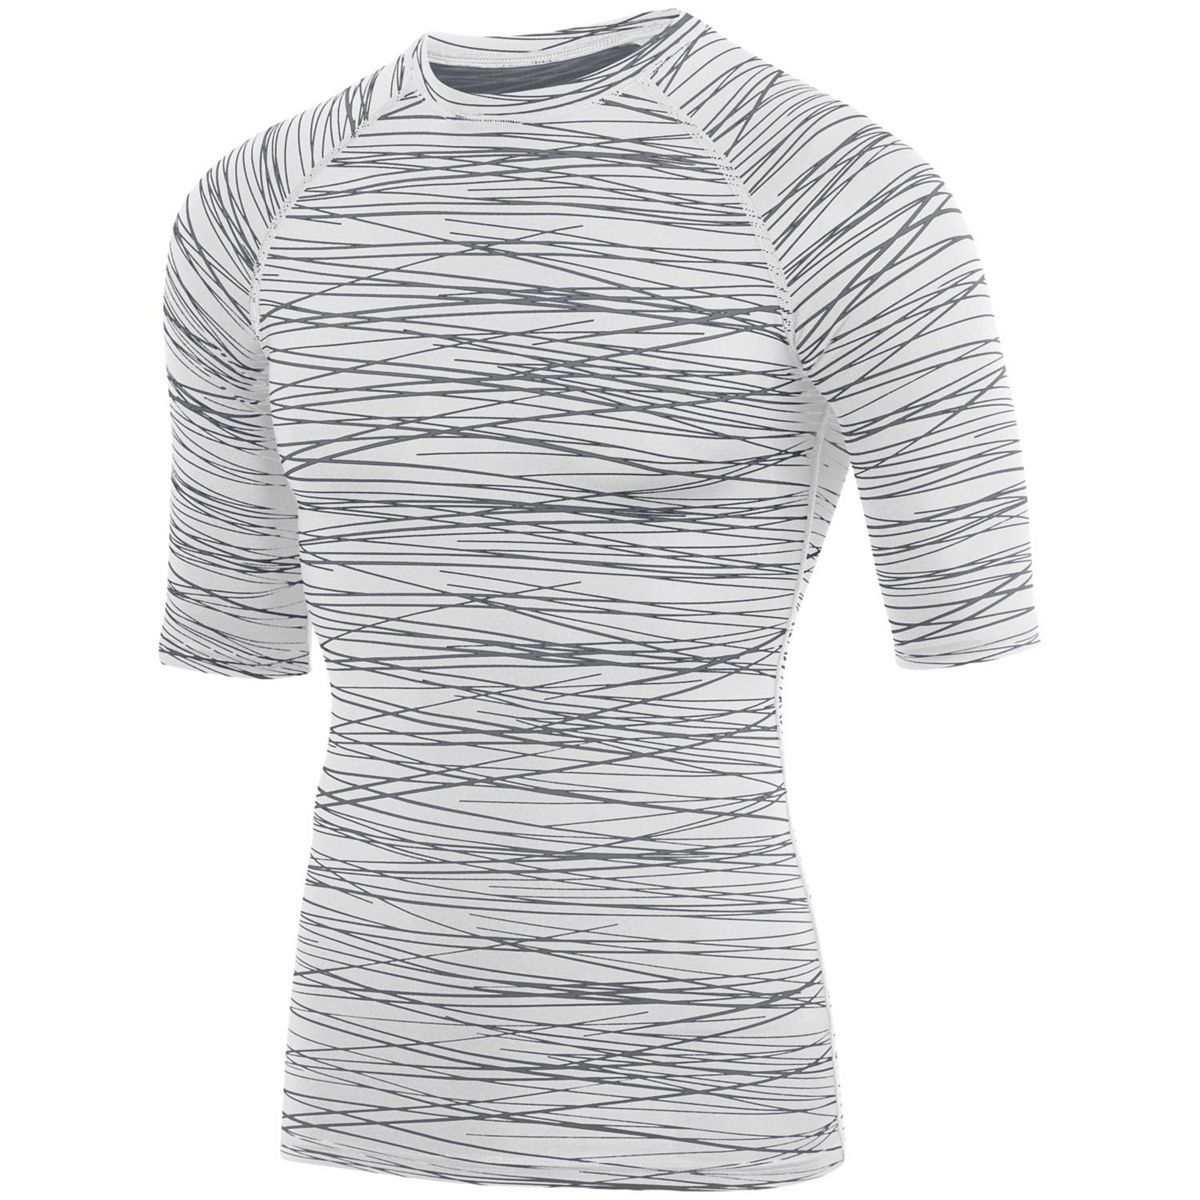 Augusta Sportswear Hyperform Compression Half Sleeve Tee in White/Graphite Print  -Part of the Adult, Adult-Tee-Shirt, T-Shirts, Augusta-Products, Shirts product lines at KanaleyCreations.com